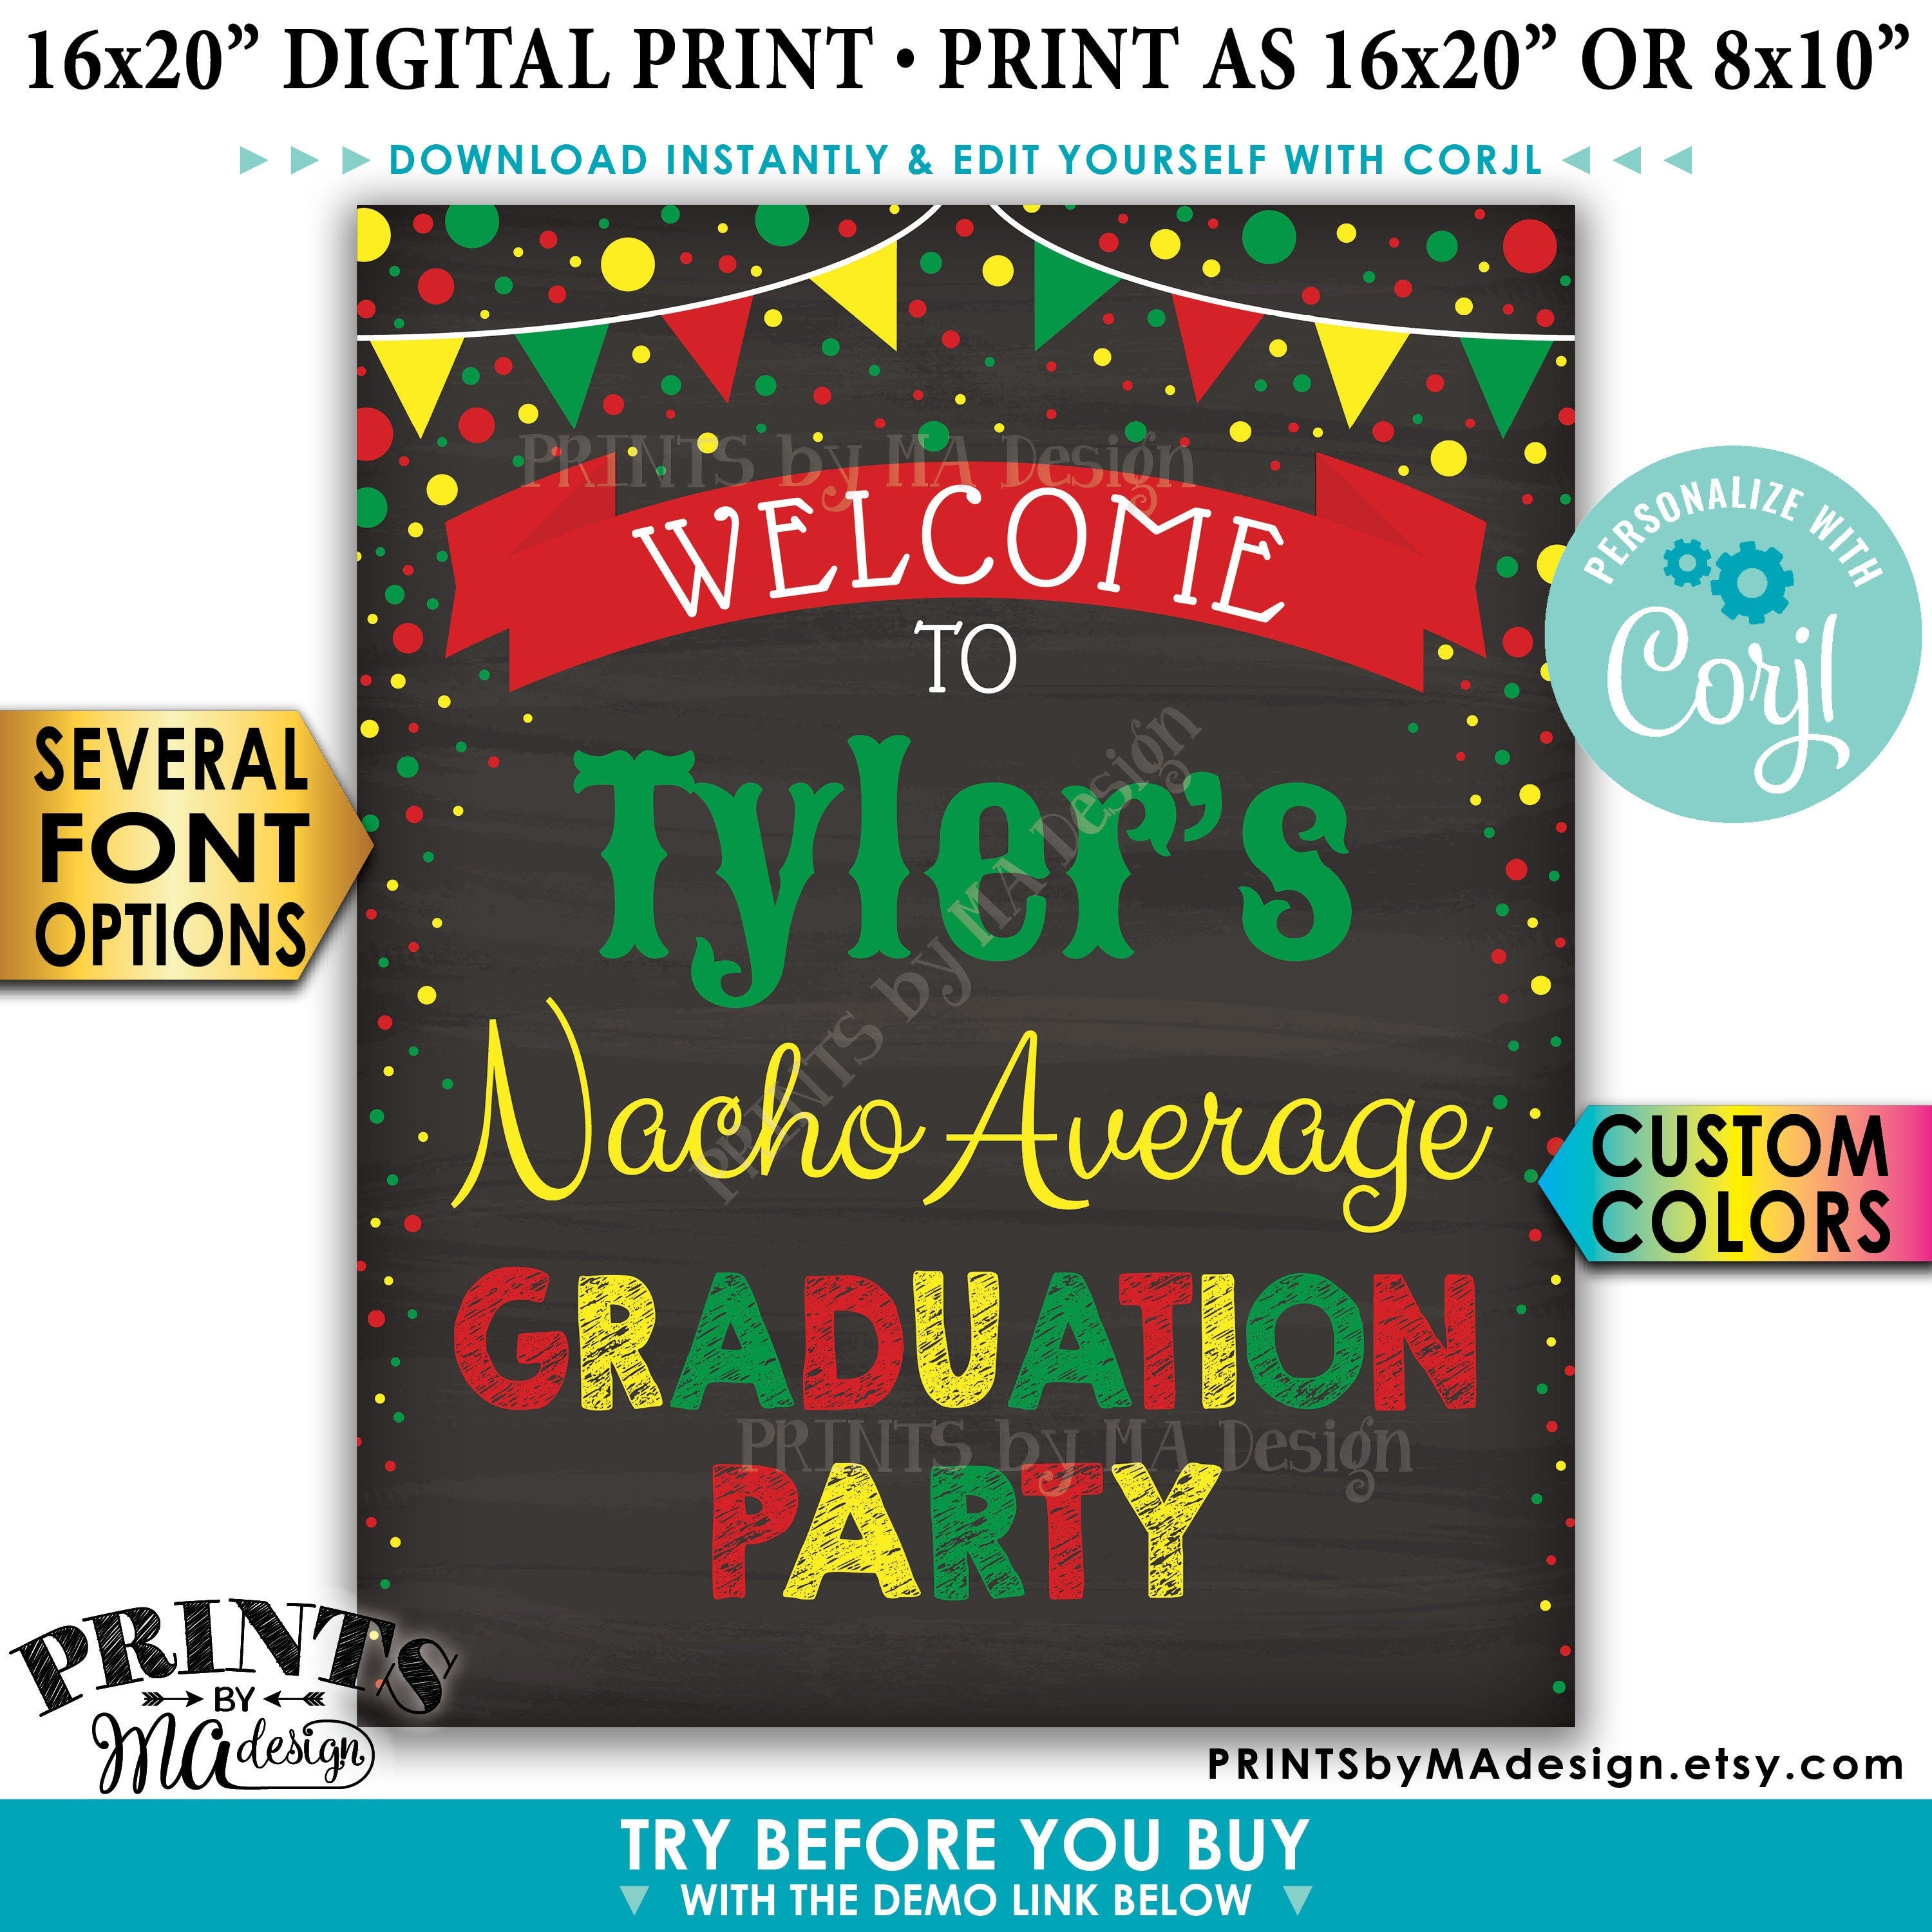 Nacho Average Graduation Party Sign, Graduation Party Decorations, PRINTABLE 8x10/16x20” Chalkboard Style Sign <Edit Yourself with Corjl>